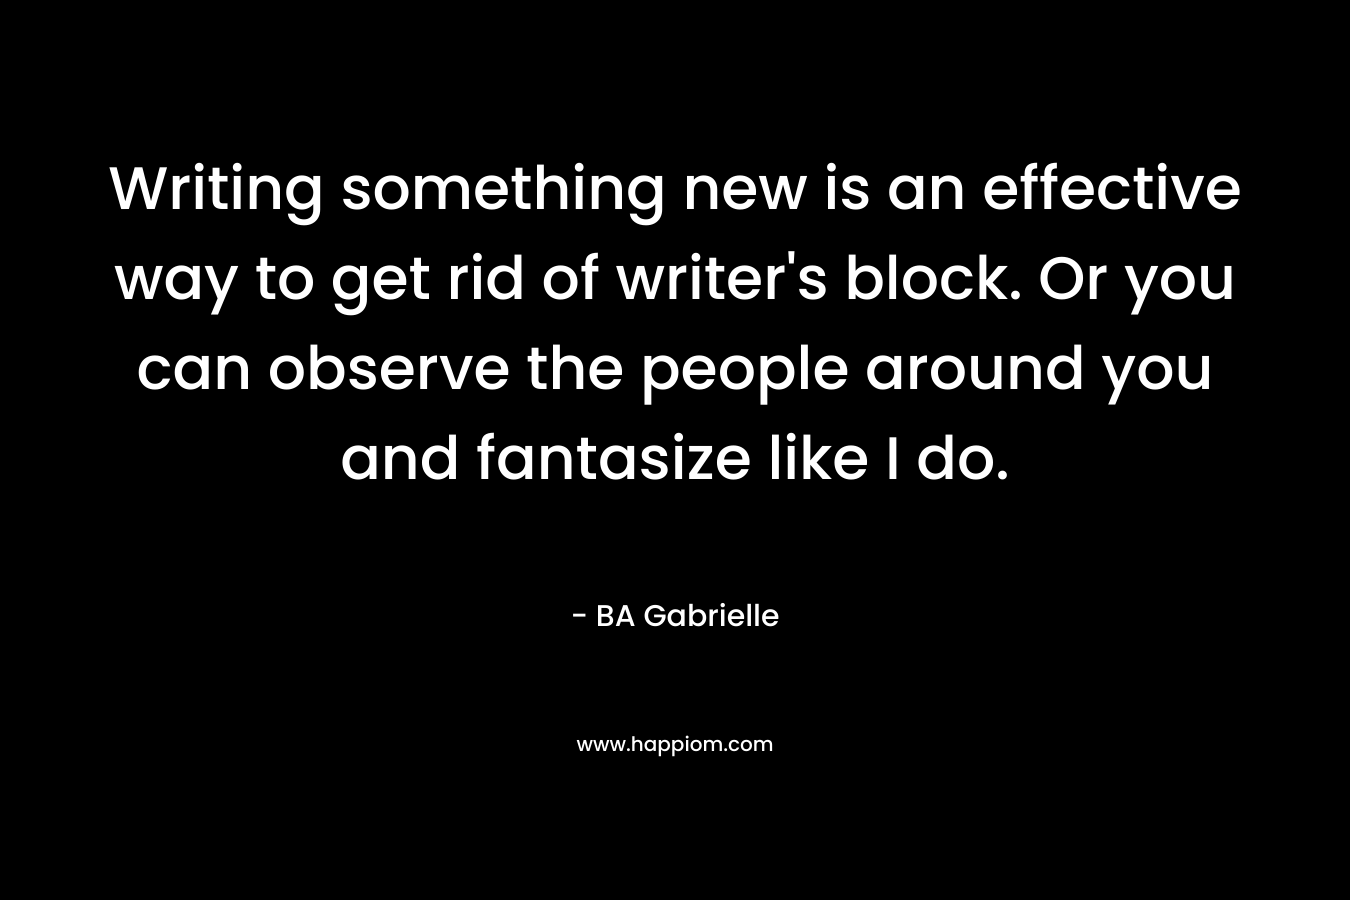 Writing something new is an effective way to get rid of writer’s block. Or you can observe the people around you and fantasize like I do. – BA Gabrielle